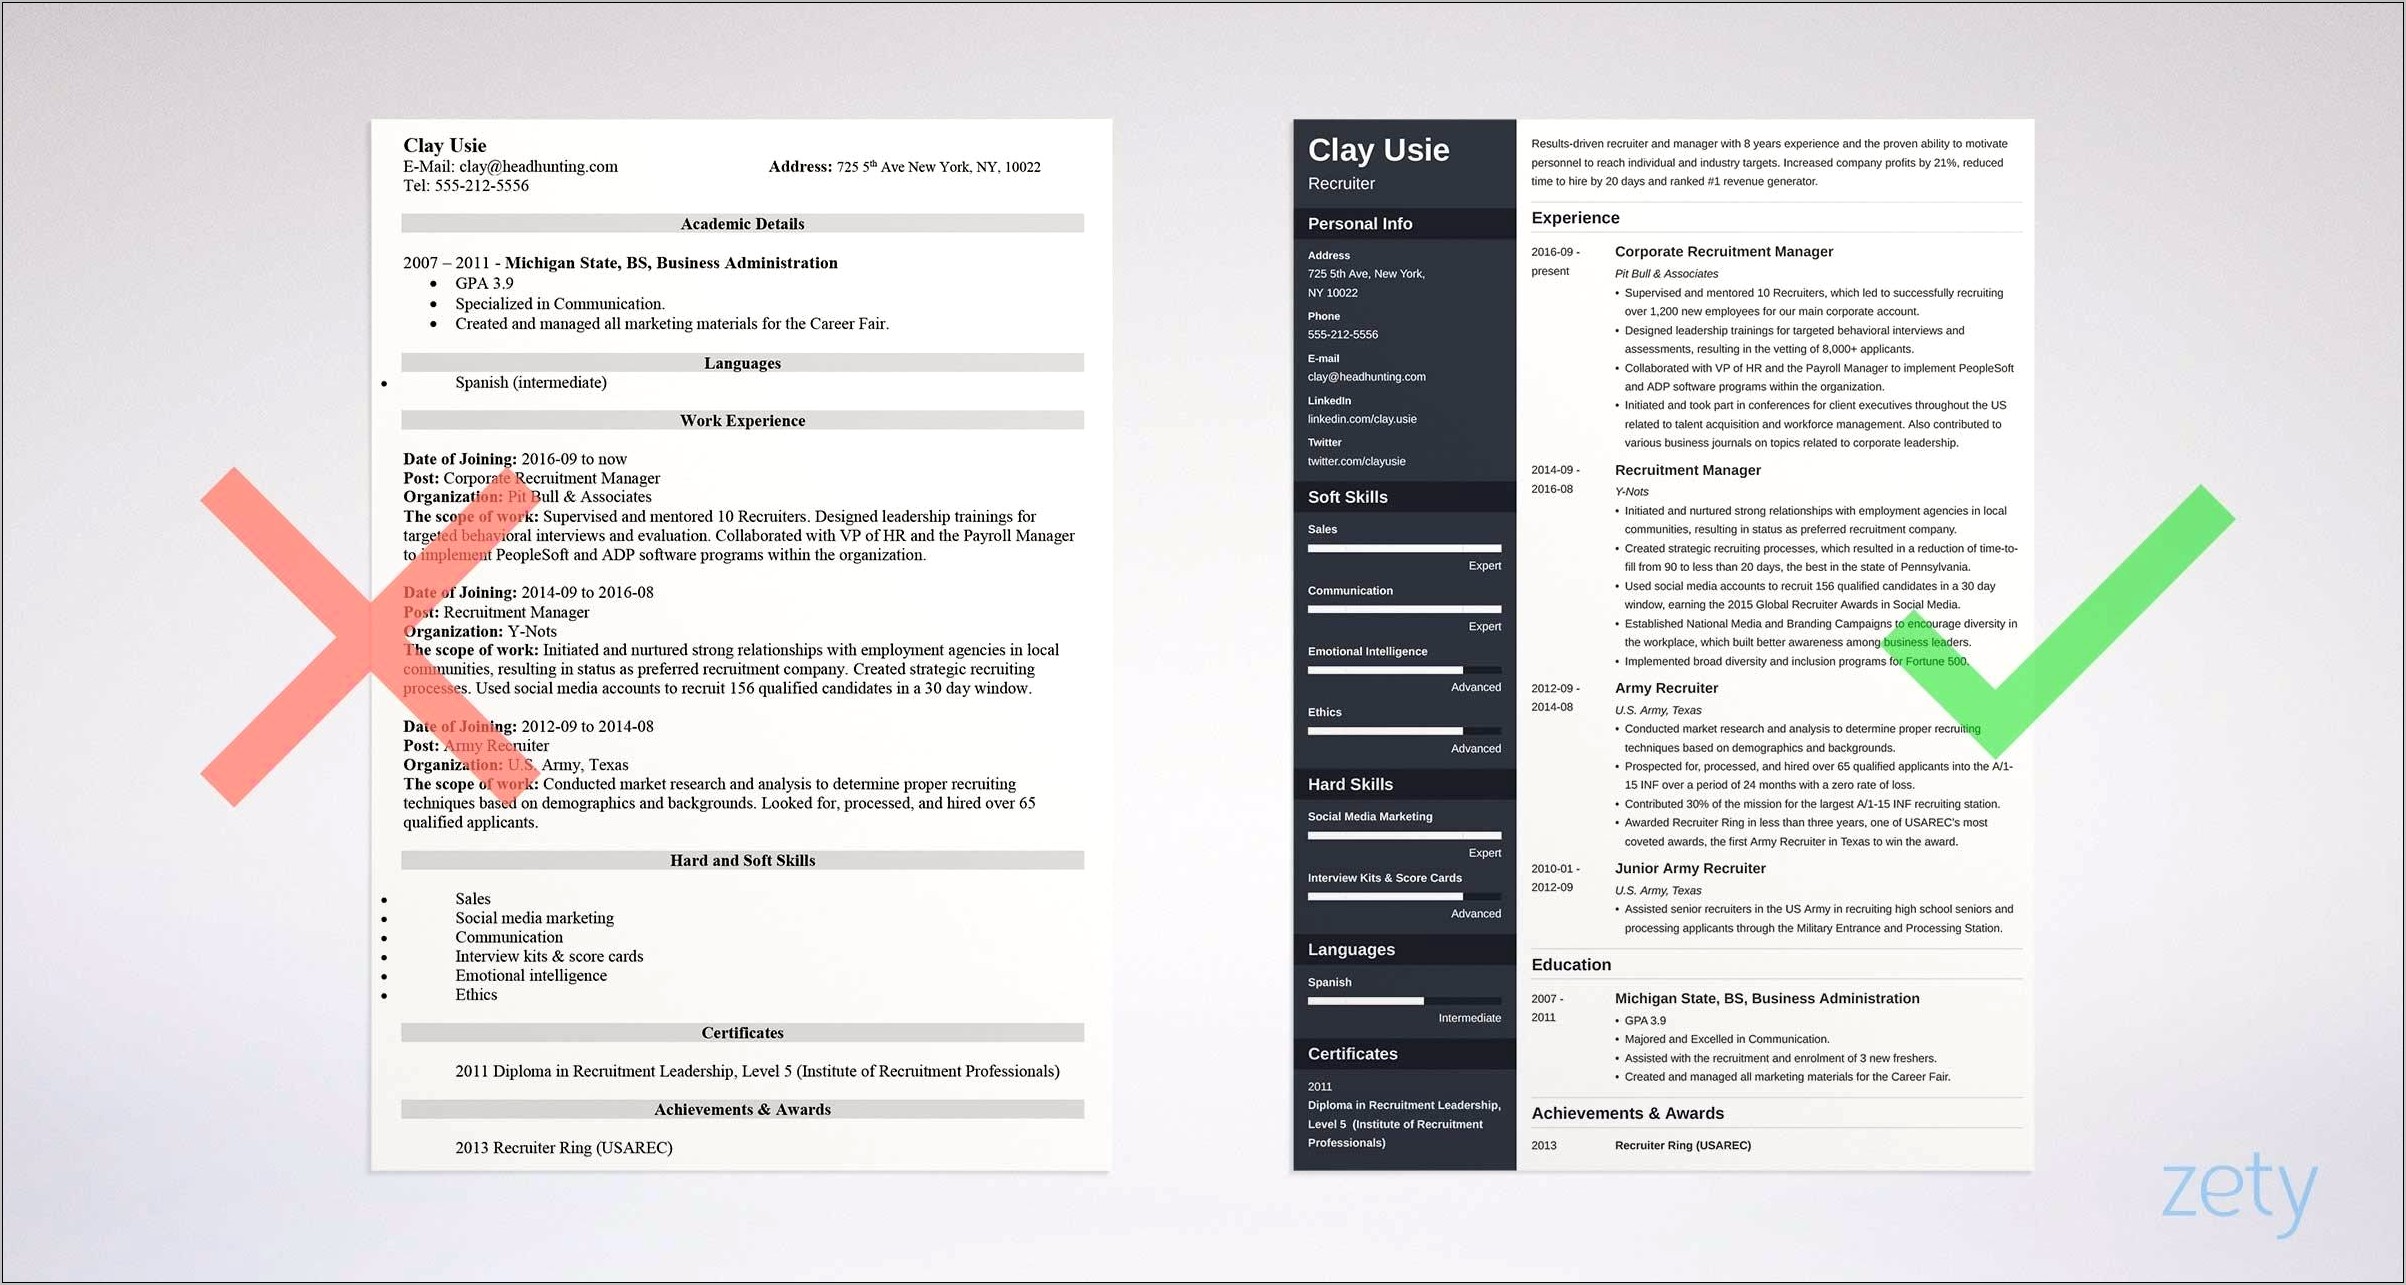 Sample Resume For Human Resources Recruiter